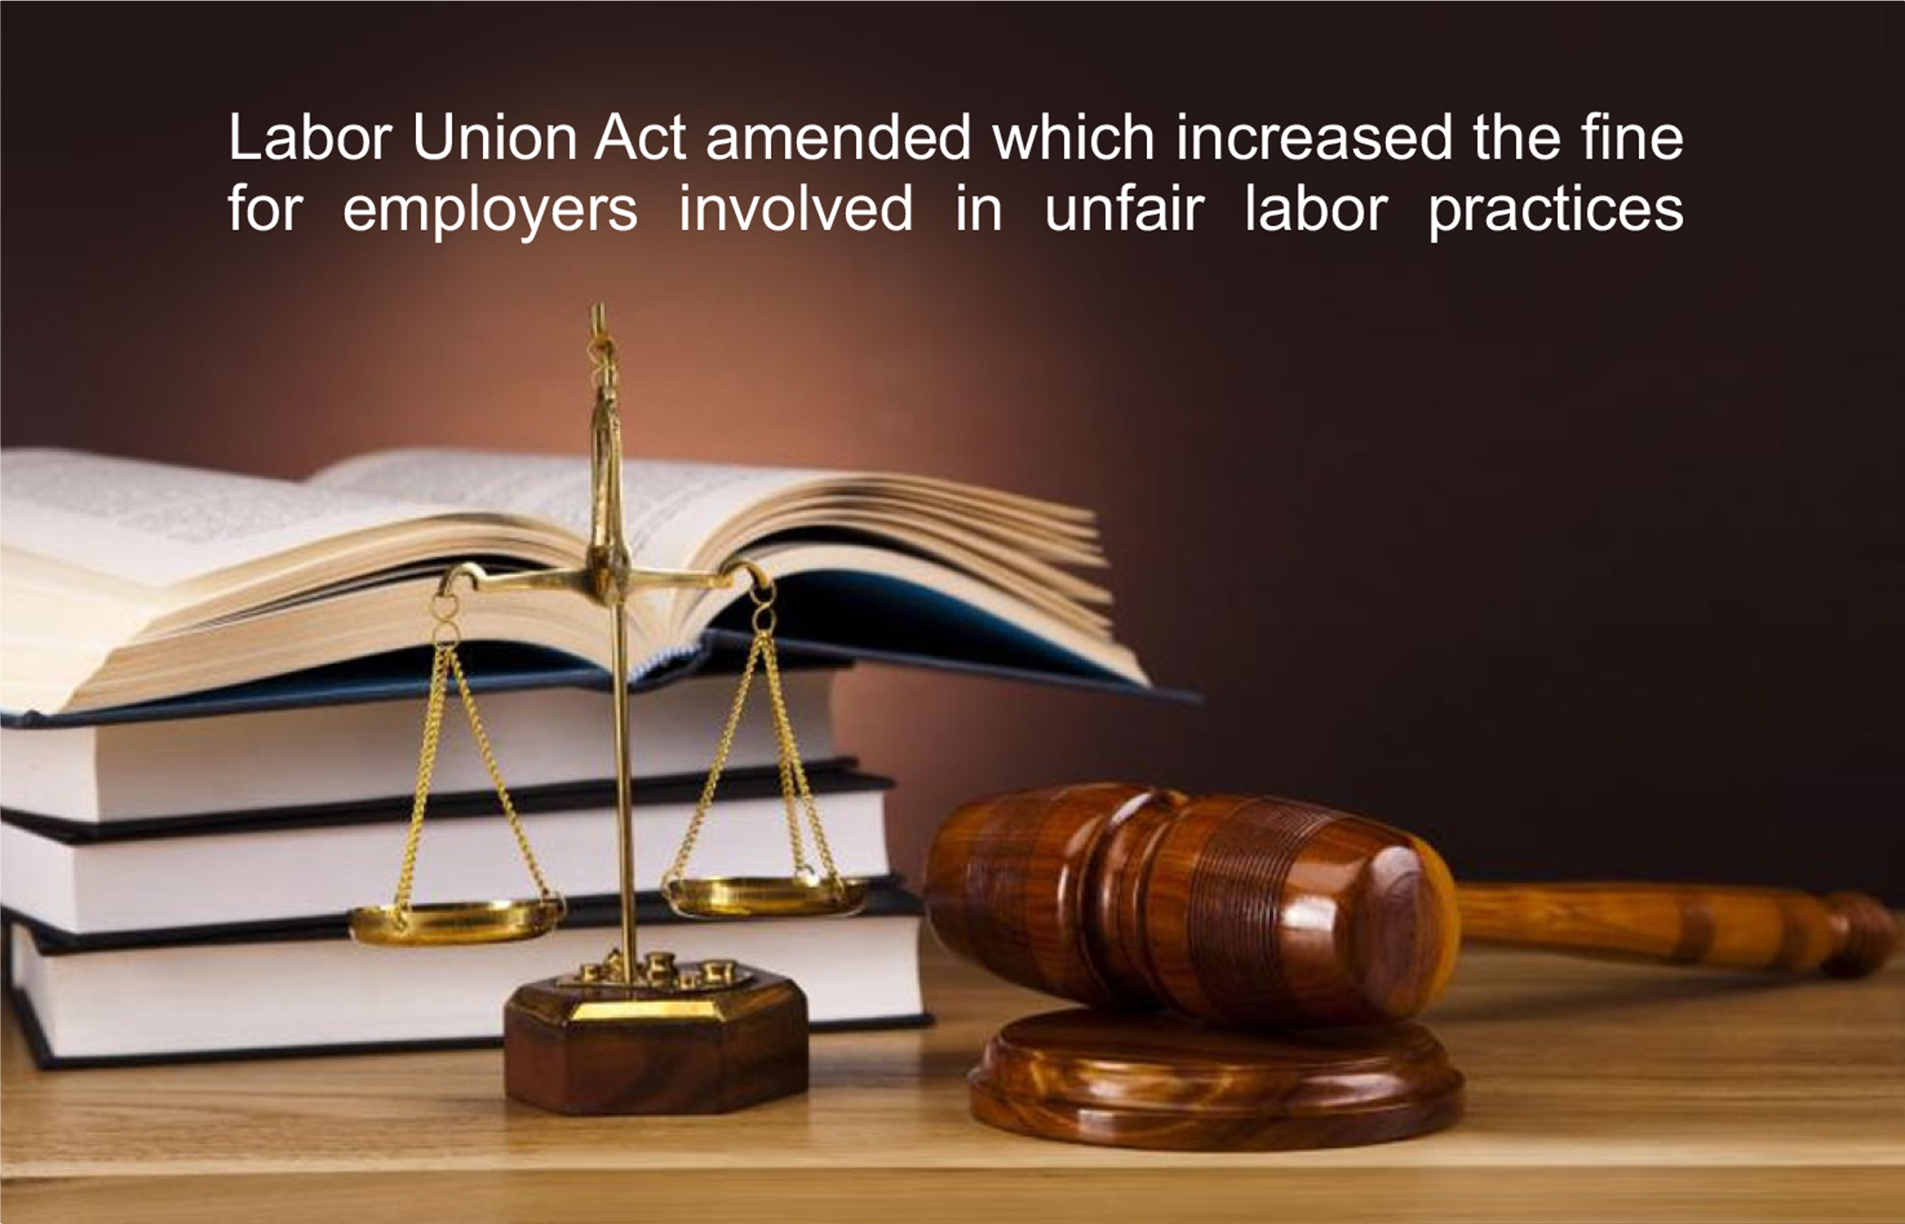 Labor Union Act Amendment: Increased Fines for Employers Involved in Unfair Labor Practices and Disclosure of the Names of Employers Implicated in Illegal Behaviors